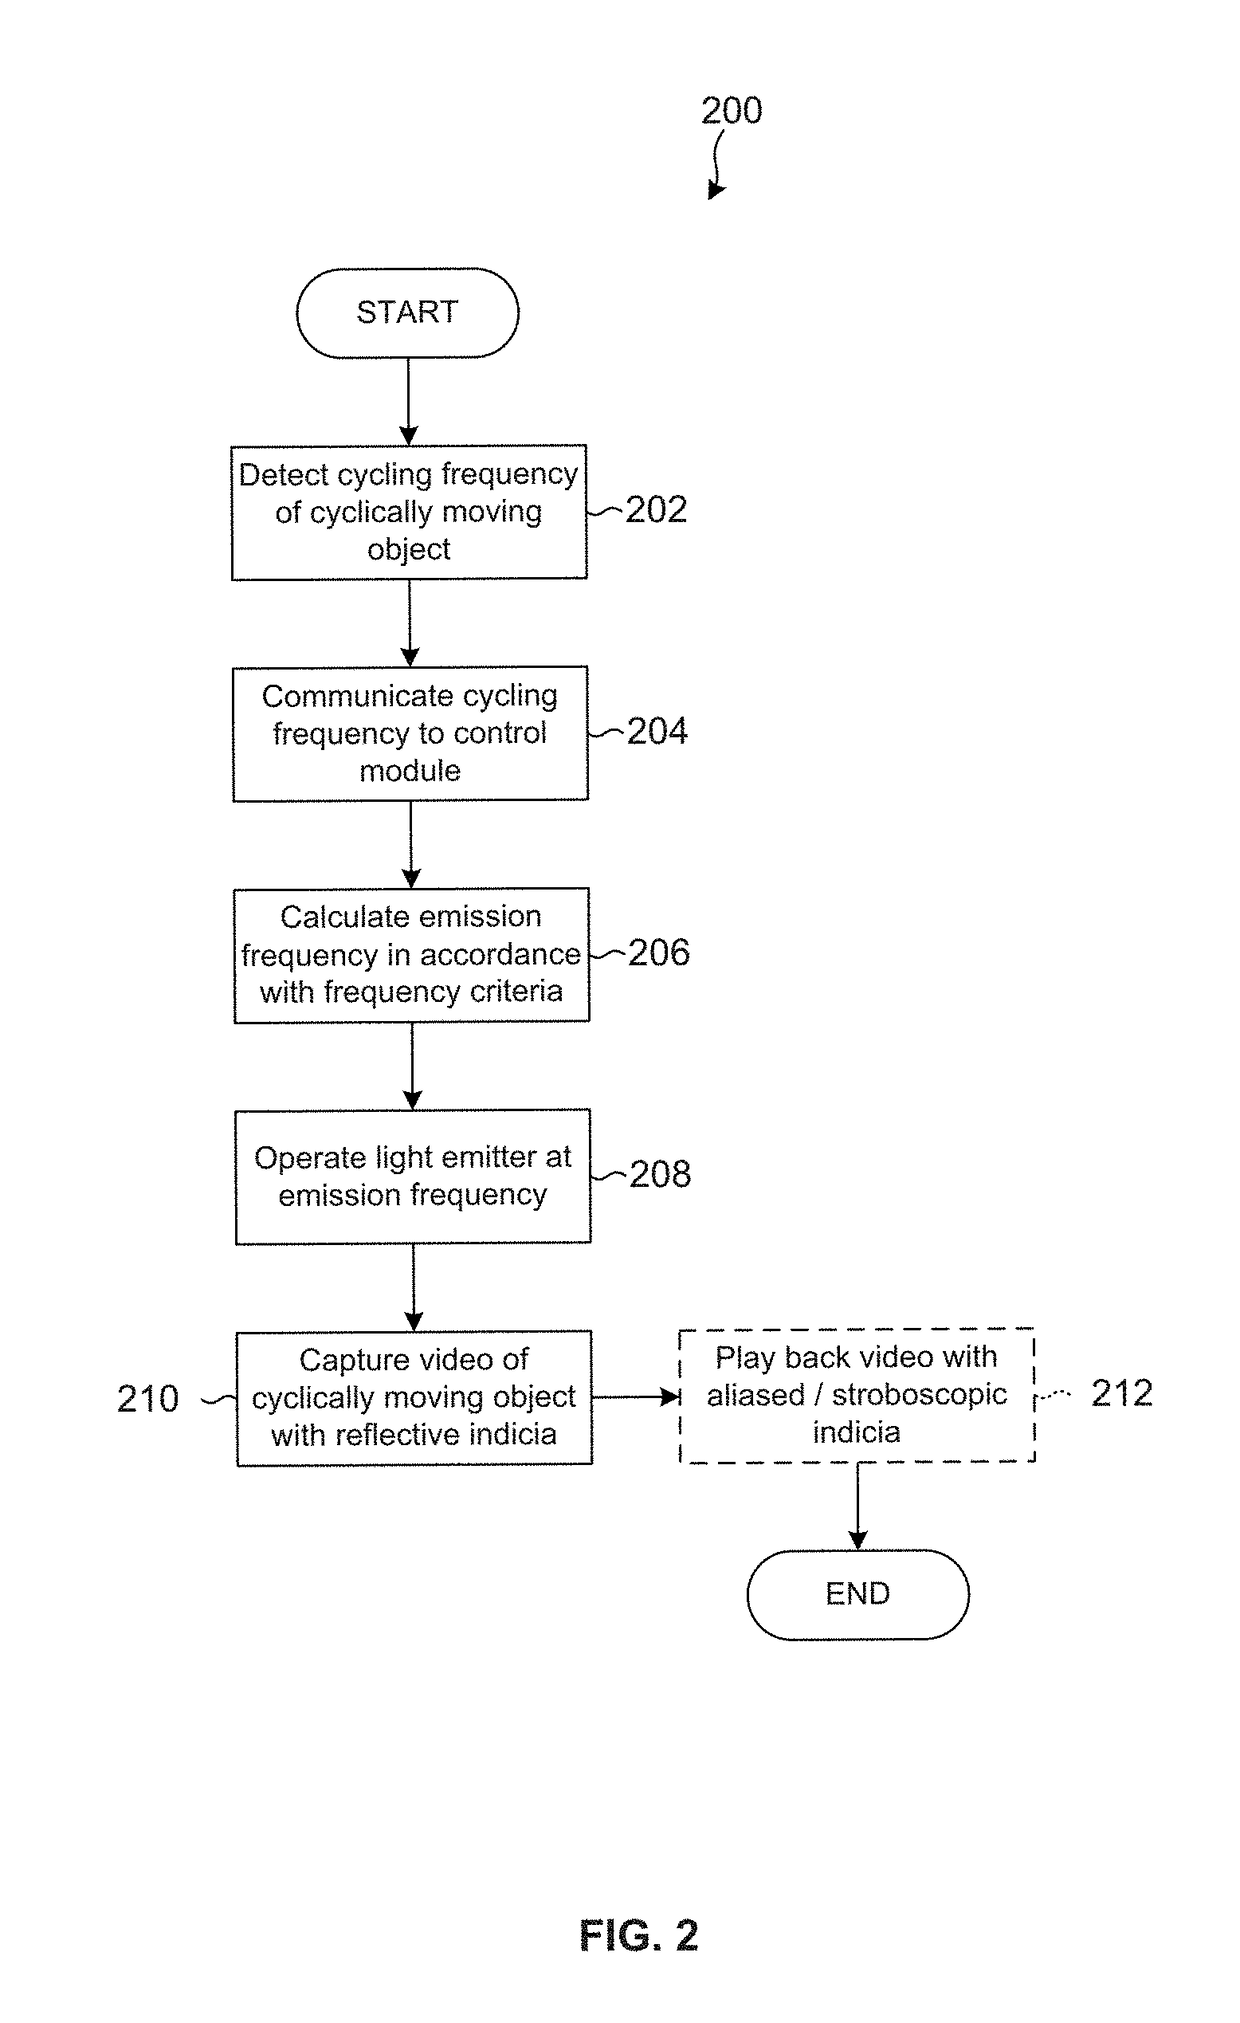 Video capturing system and method for imaging cyclically moving objects